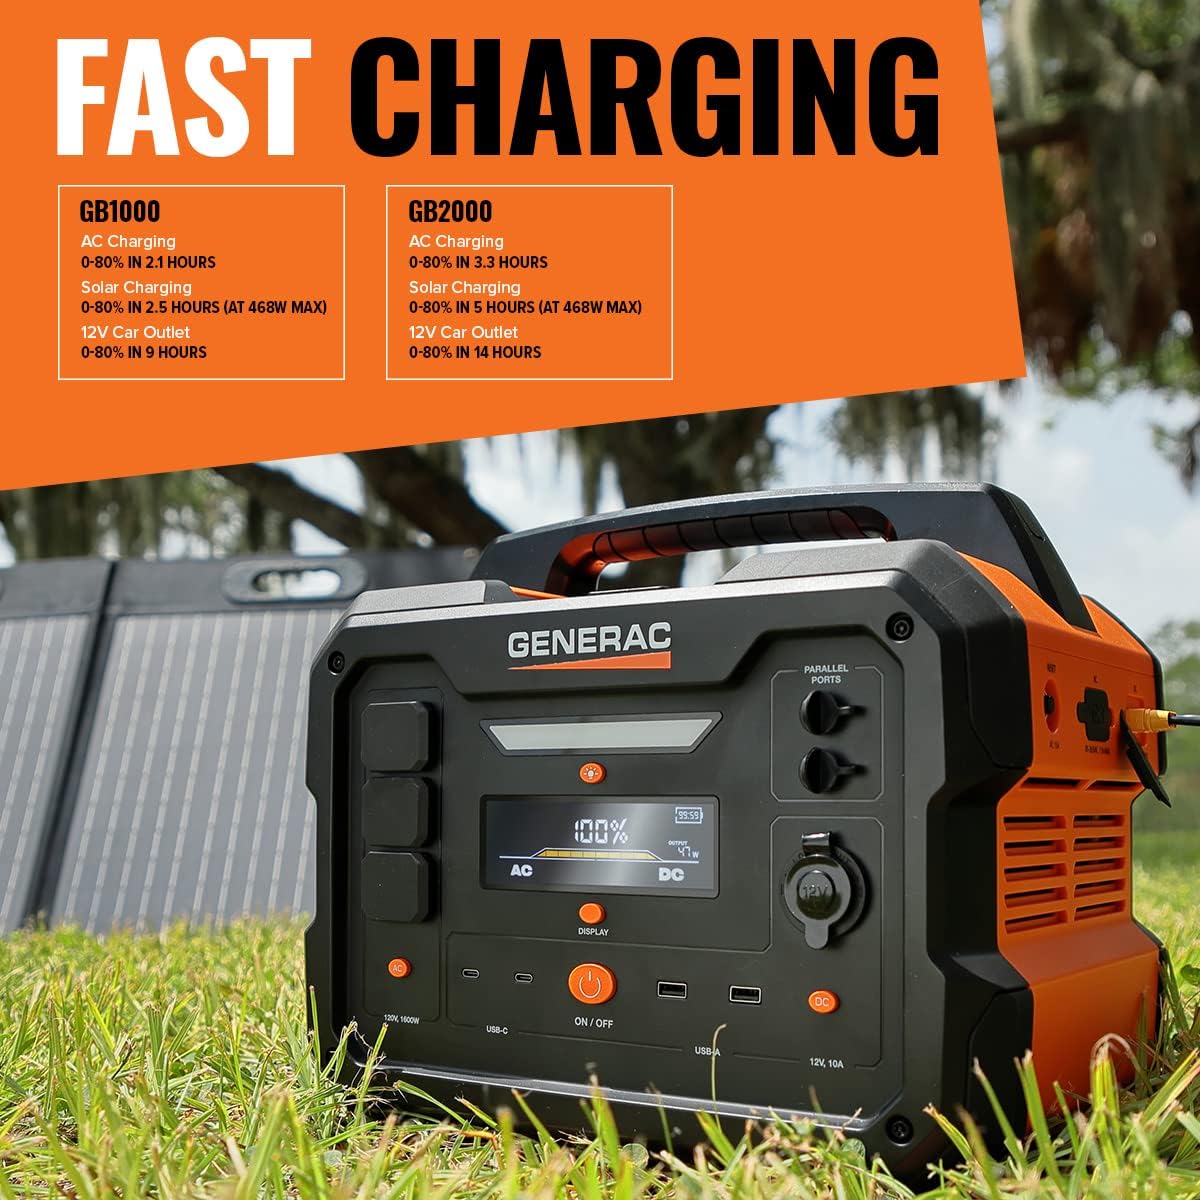 Generac 8026 GB2000 2106Wh Portable Power Station with Lithium-Ion NMC Battery Power  Fast Solar Charging Built-In MPPT Controller, 50-State / CARB Compliant - Generac 8026 GB2000 Portable Power Station Review